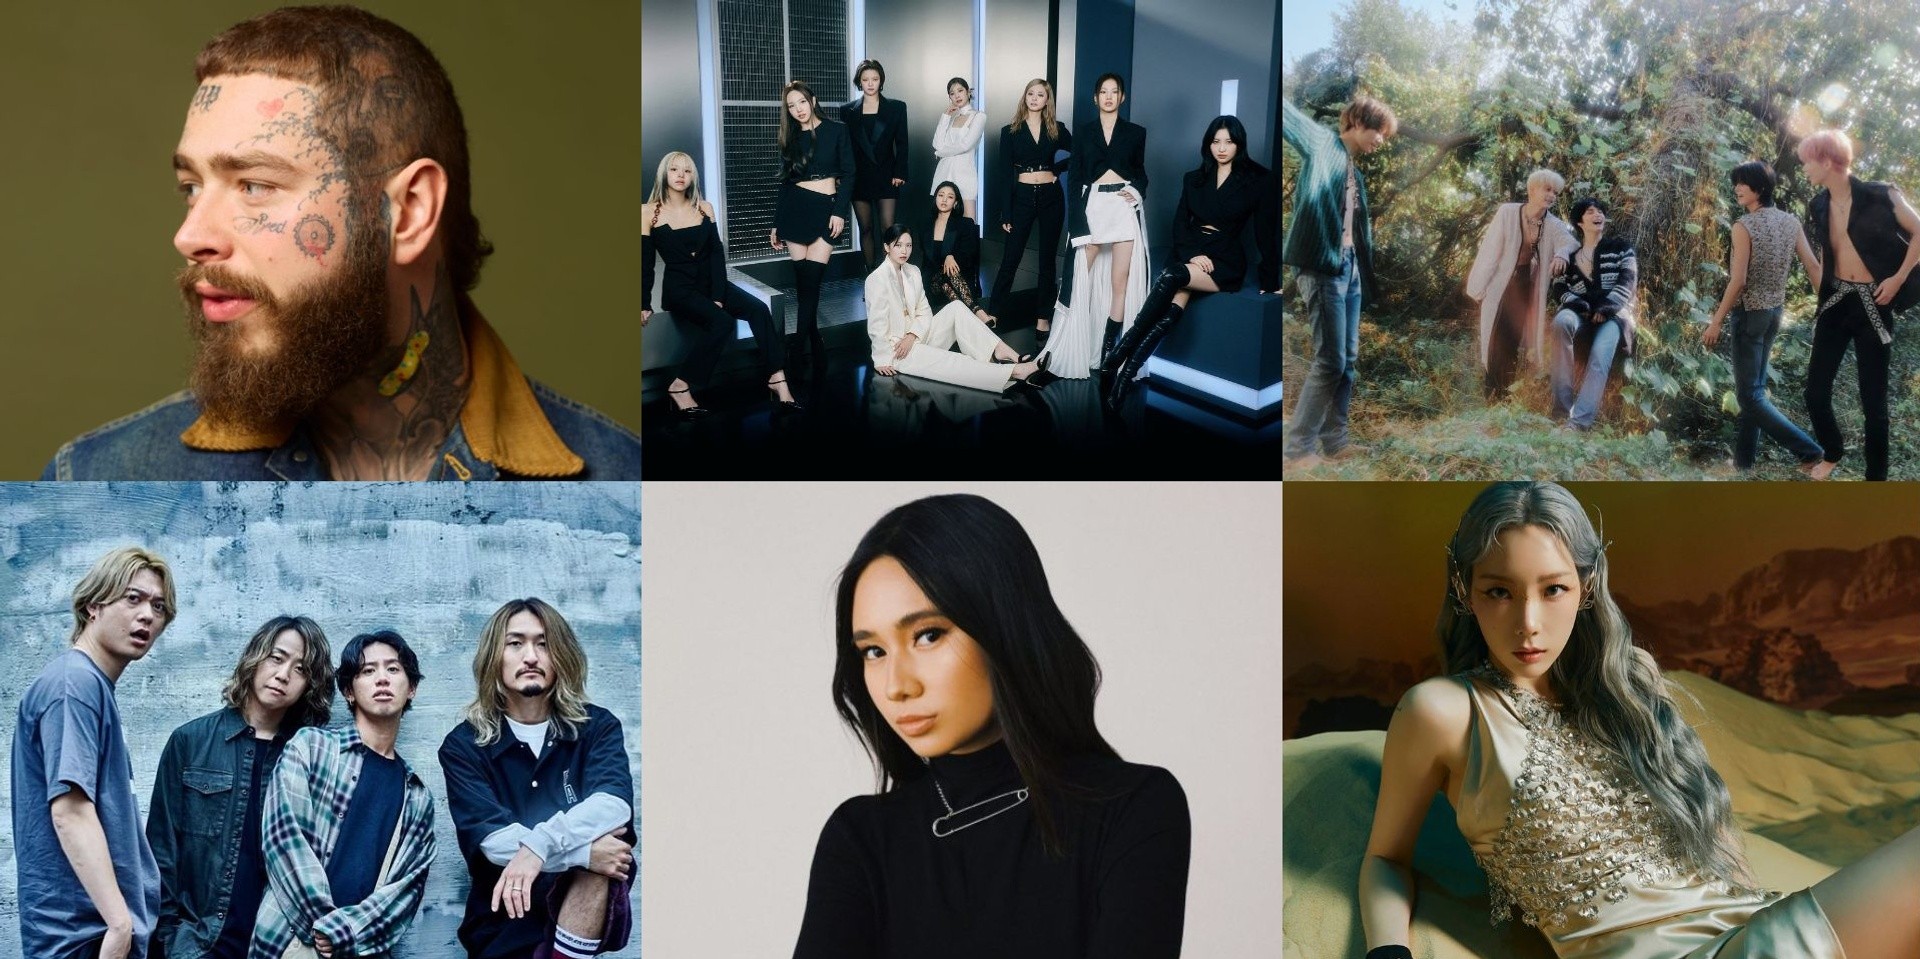 A guide to 2023 concerts and festivals in the Philippines — TWICE, Post Malone, NIKI, TXT, TAEYEON, ONE OK ROCK, and more